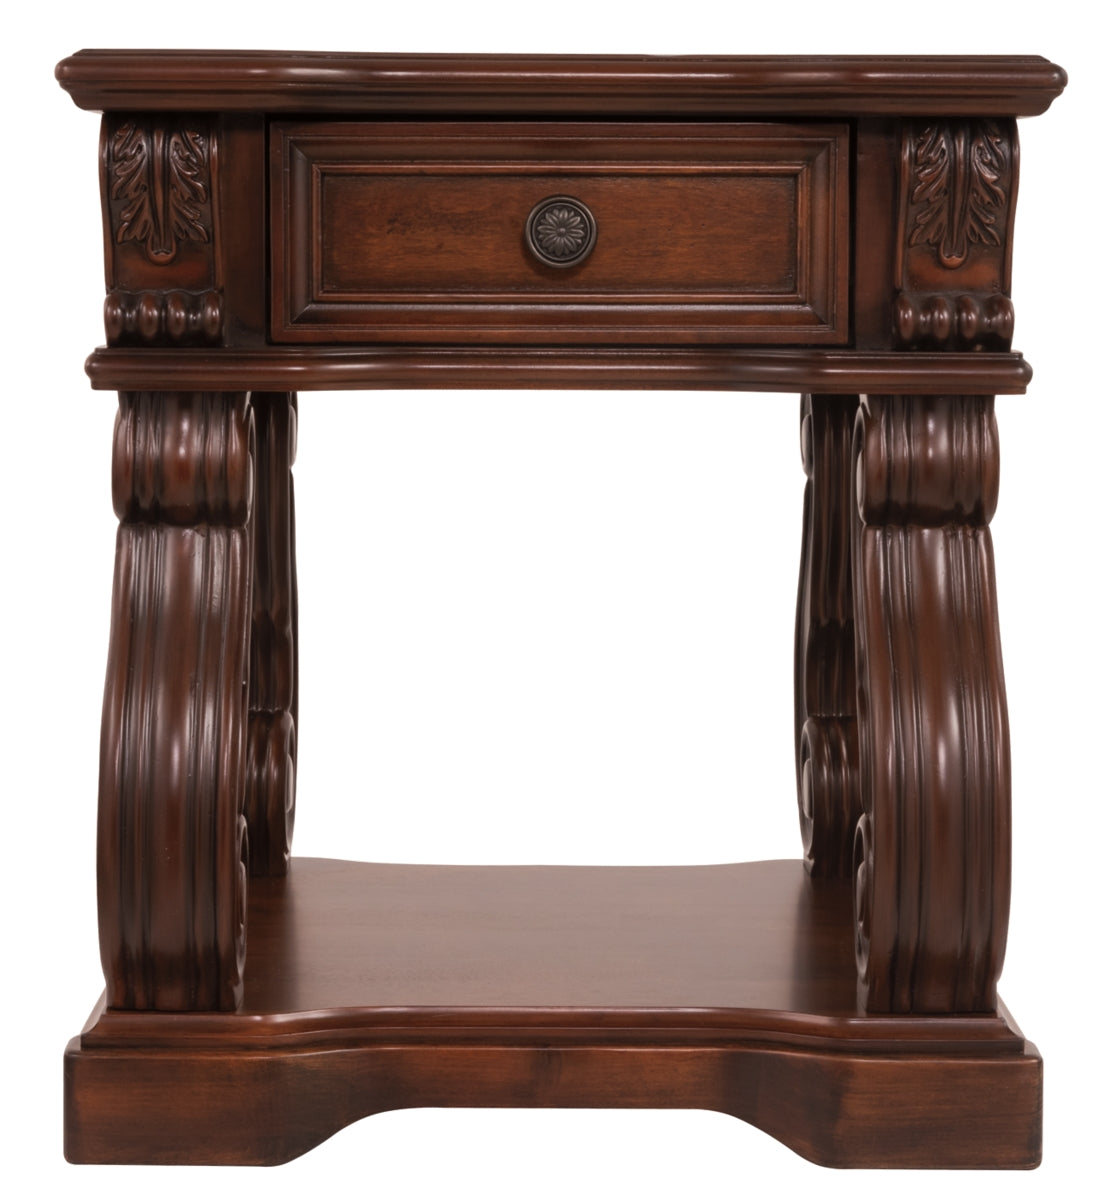 Alymere End Table